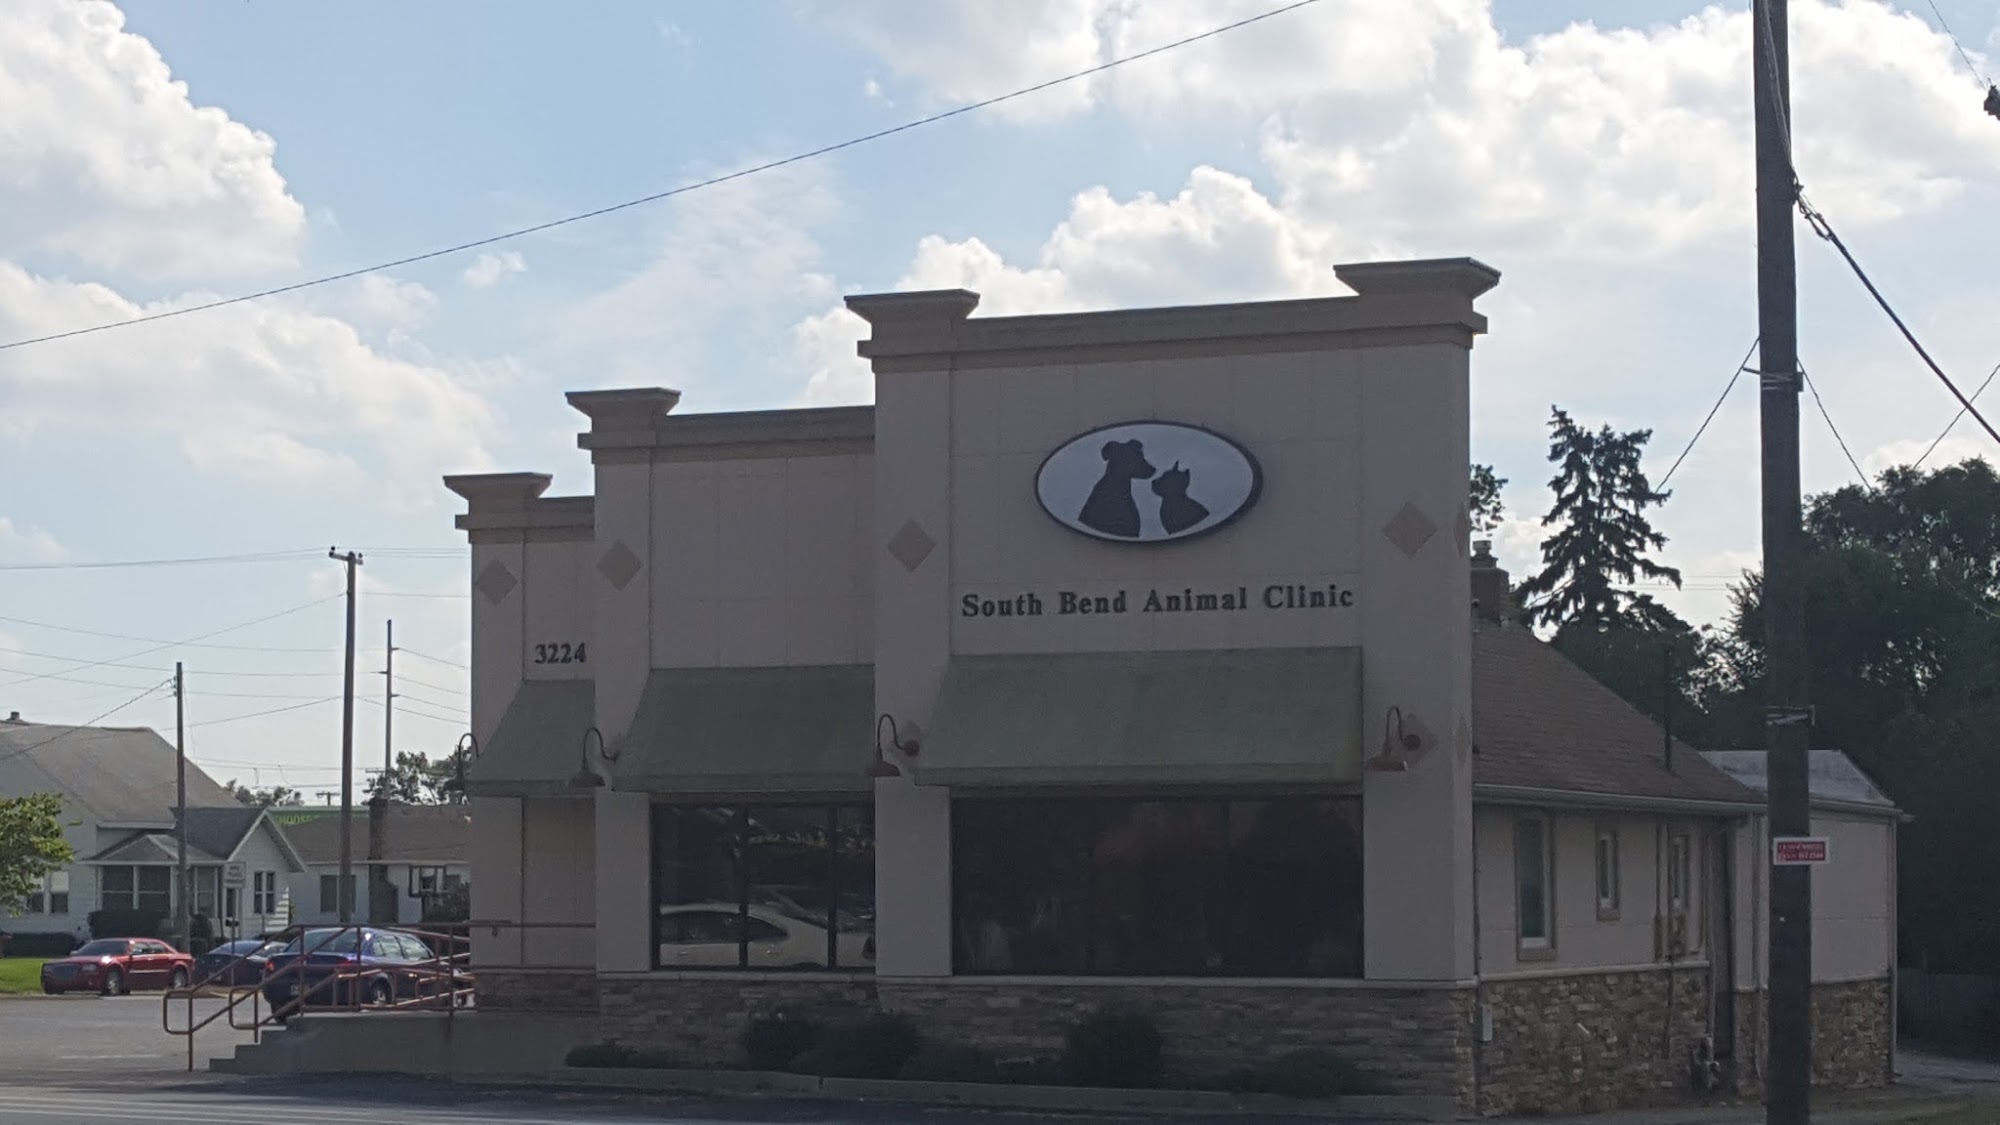 South Bend Animal Clinic